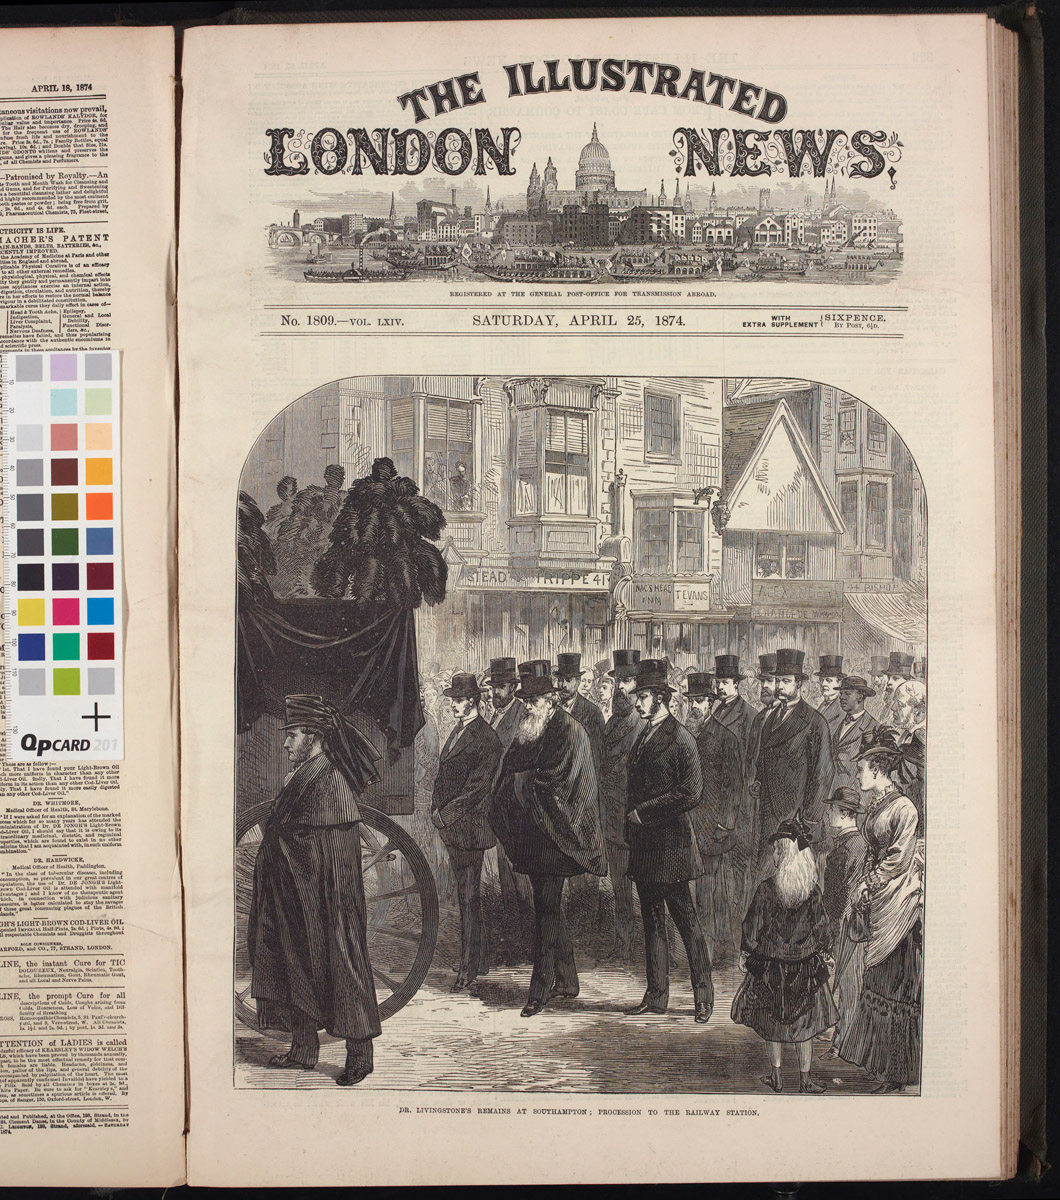 Dr. Livingstone's Remains at Southampton; Procession to the Railway Station. Illustration from Illustrated London News (25 Apr. 1874). Copyright National Library of Scotland. Creative Commons Share-alike 2.5 UK: Scotland (https://creativecommons.org/licenses/by-nc-sa/2.5/scotland/).